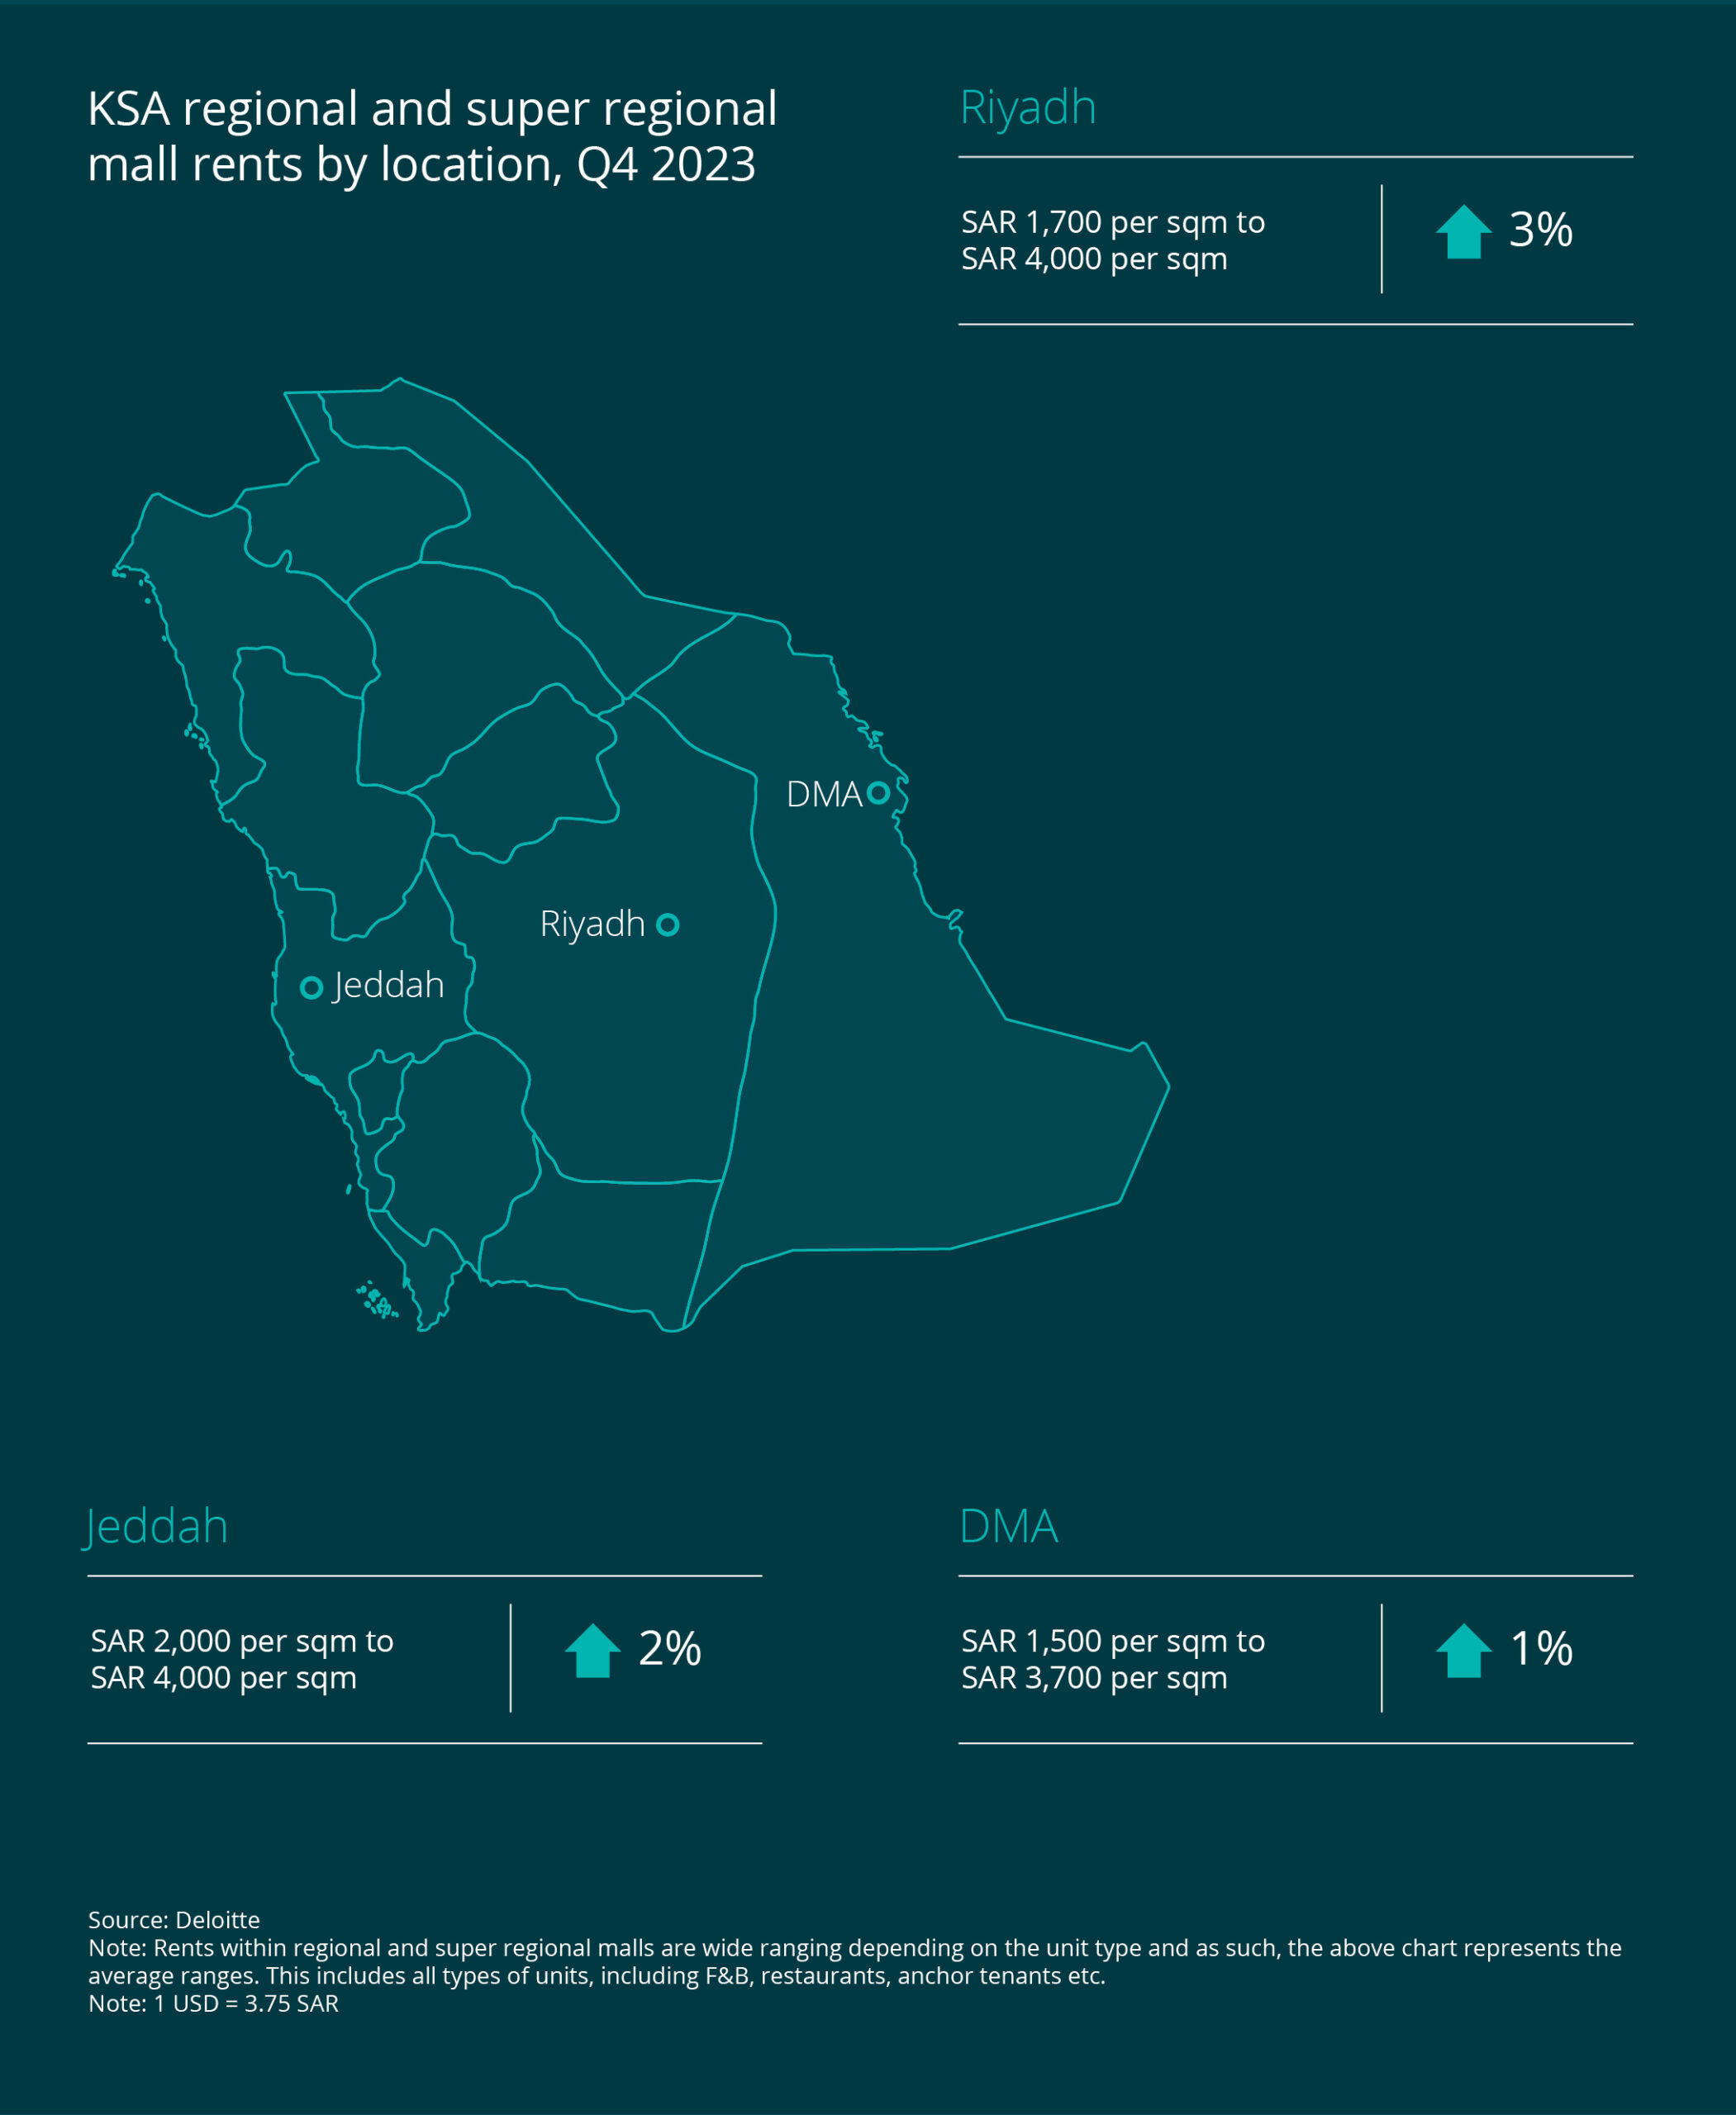 KSA Real Estate Report by Deloitte reveals key market trends and growth projections in the Kingdom